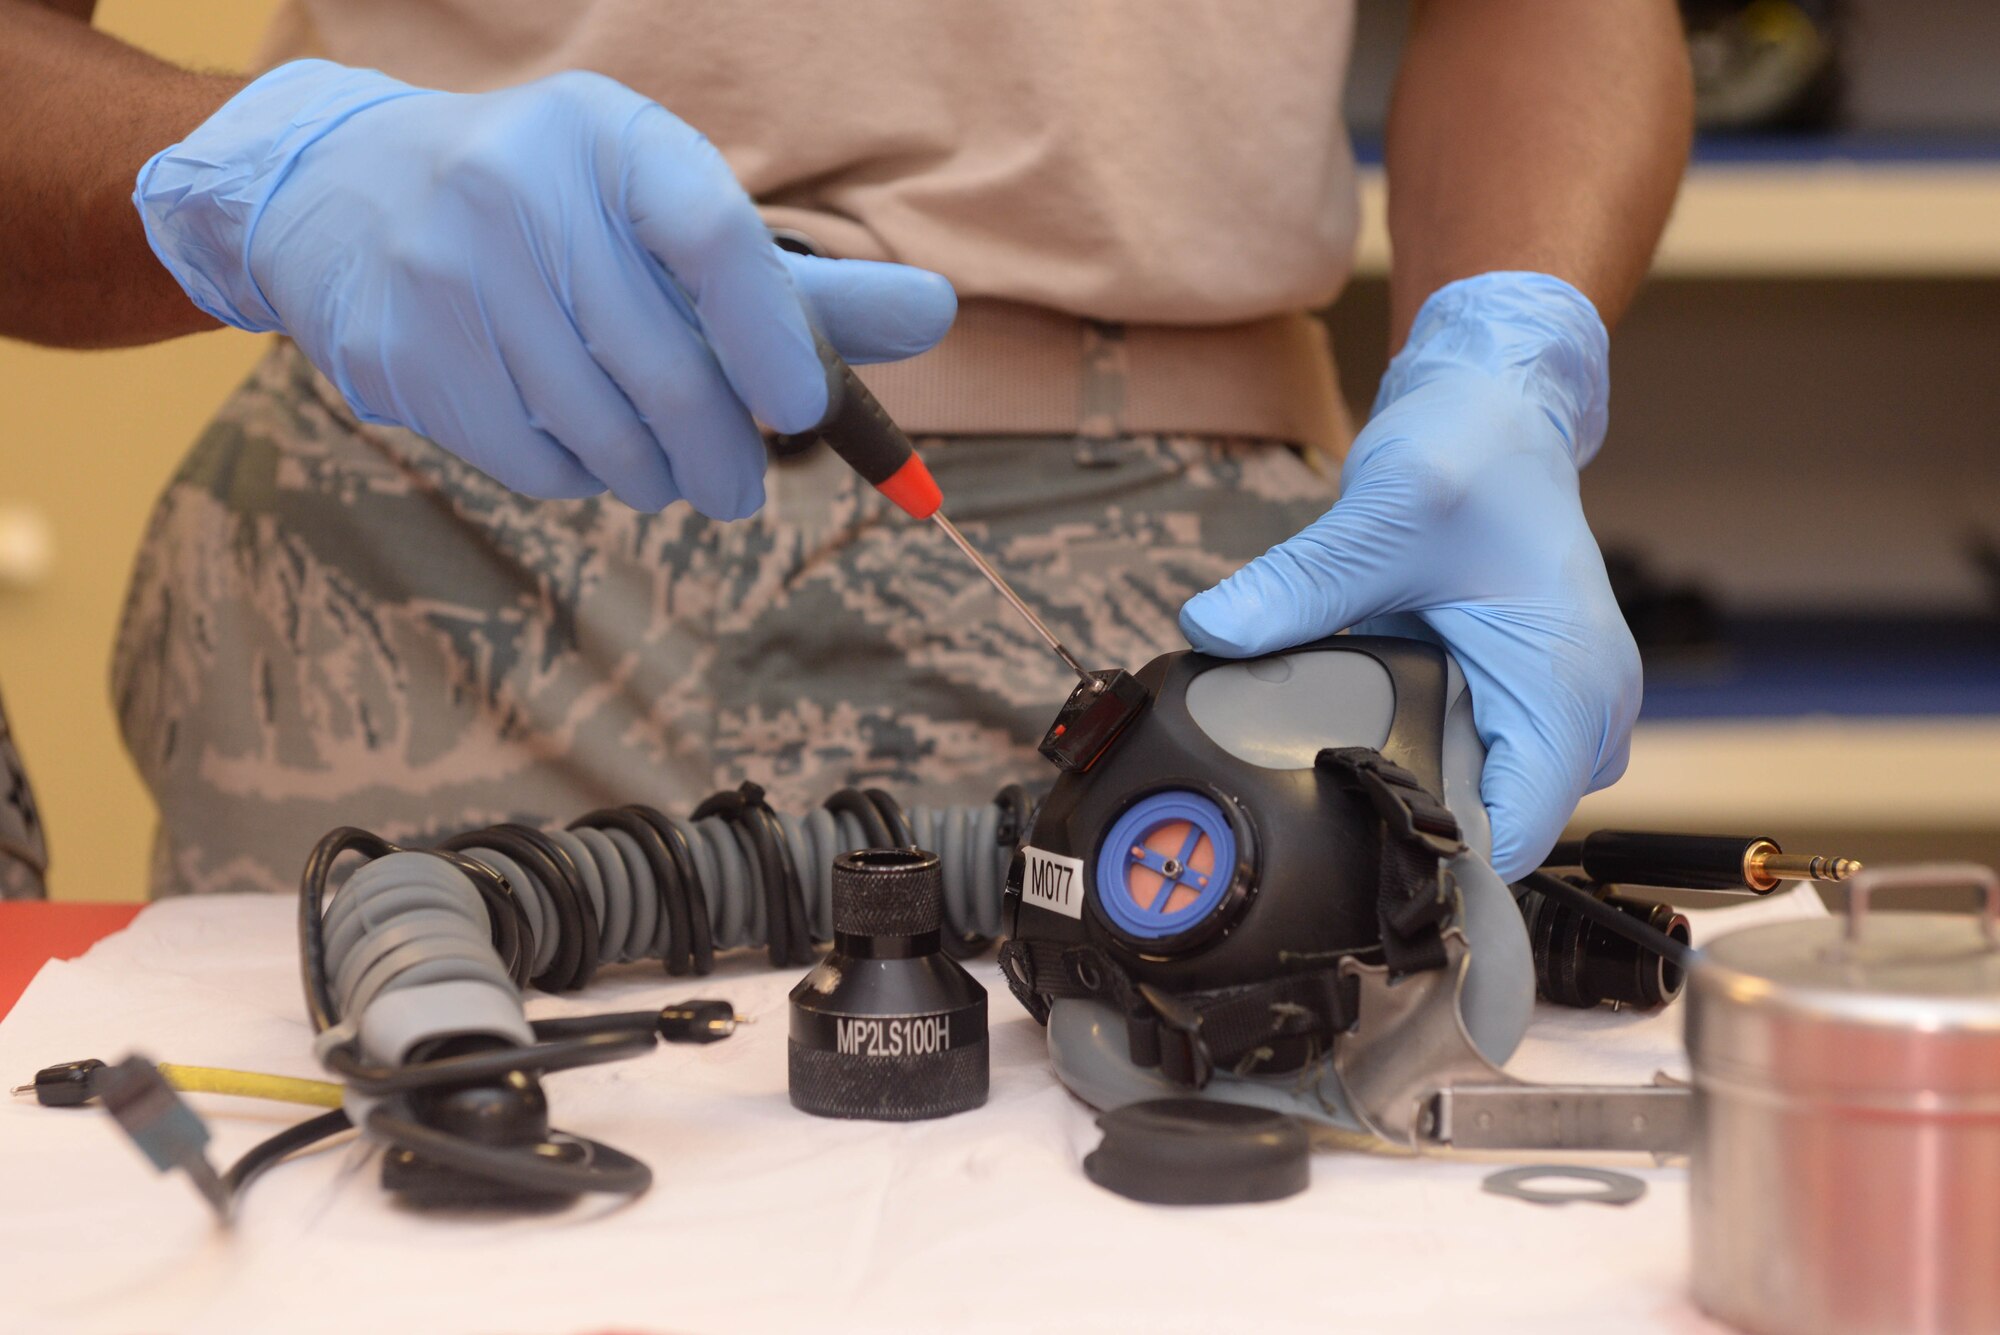 An Airman from the 5th Operations Support Squadron aircrew flight equipment section tightens screws to re-install the helmet’s microphone at Minot Air Force Base, N.D., July 26, 2016. Cleaning and inspecting helmets ensures proper function for pilots. (U.S. Air Force photo/Airman 1st Class Jessica Weissman)